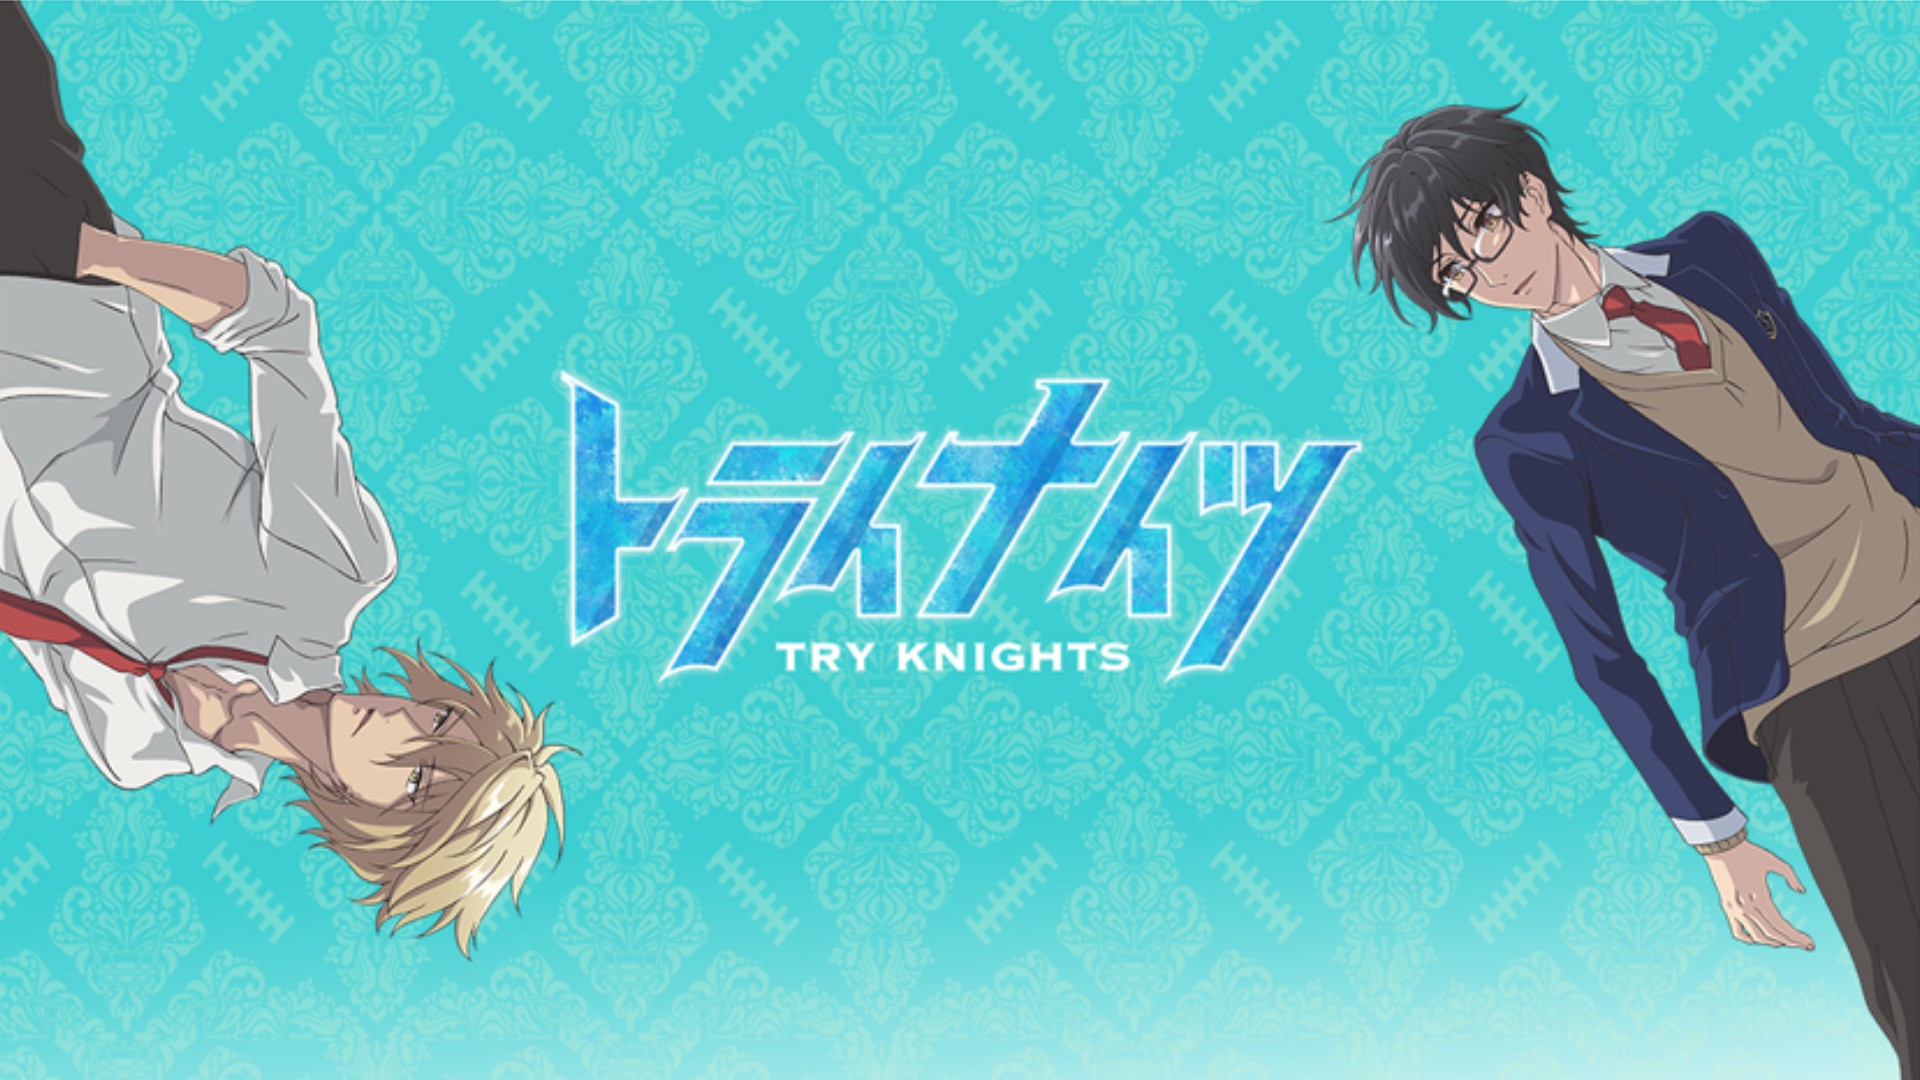 Try Knights cast